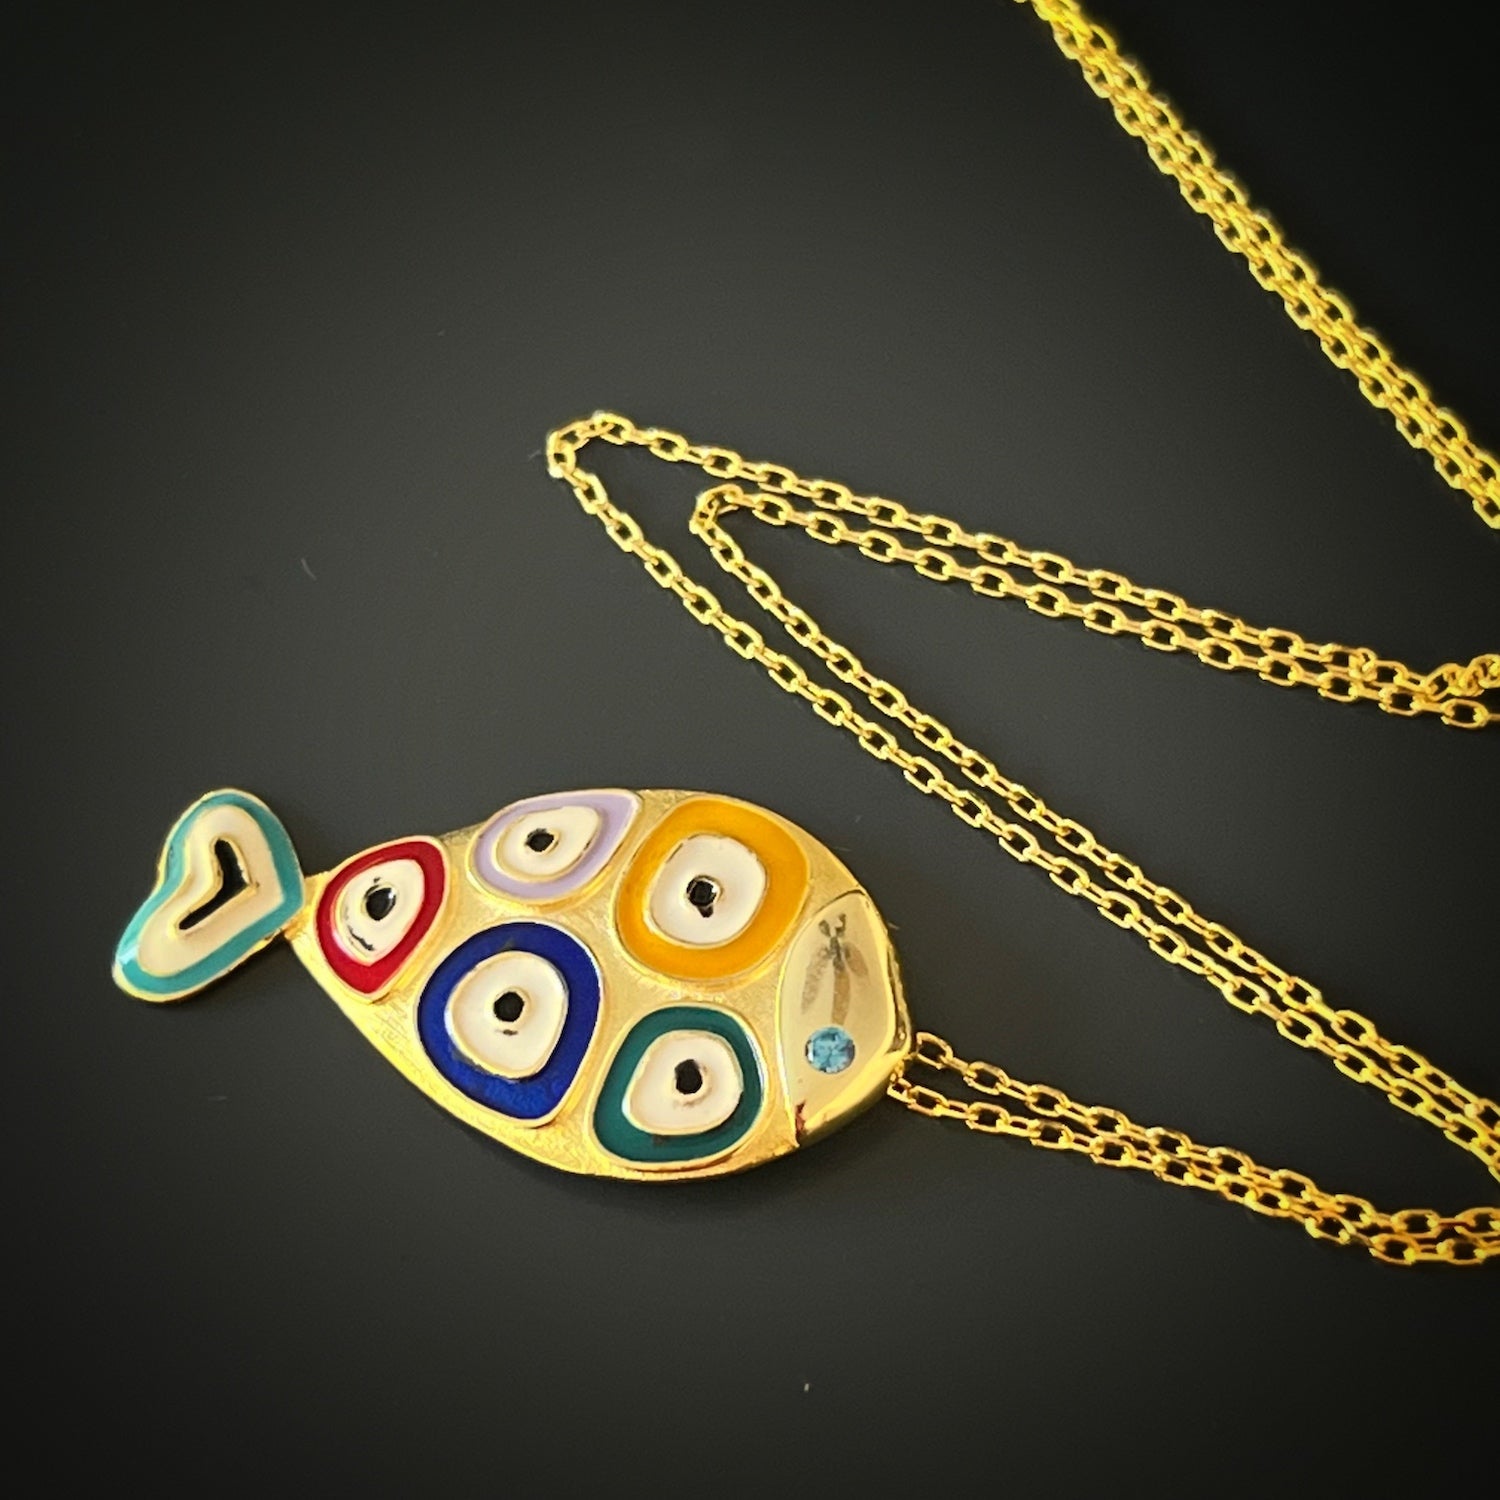 Colorful Enamel Evil Eye Fish Necklace - Eye-catching necklace with a fish pendant and intricate evil eye designs, handmade from 925 Sterling silver on 18K gold plated chain.